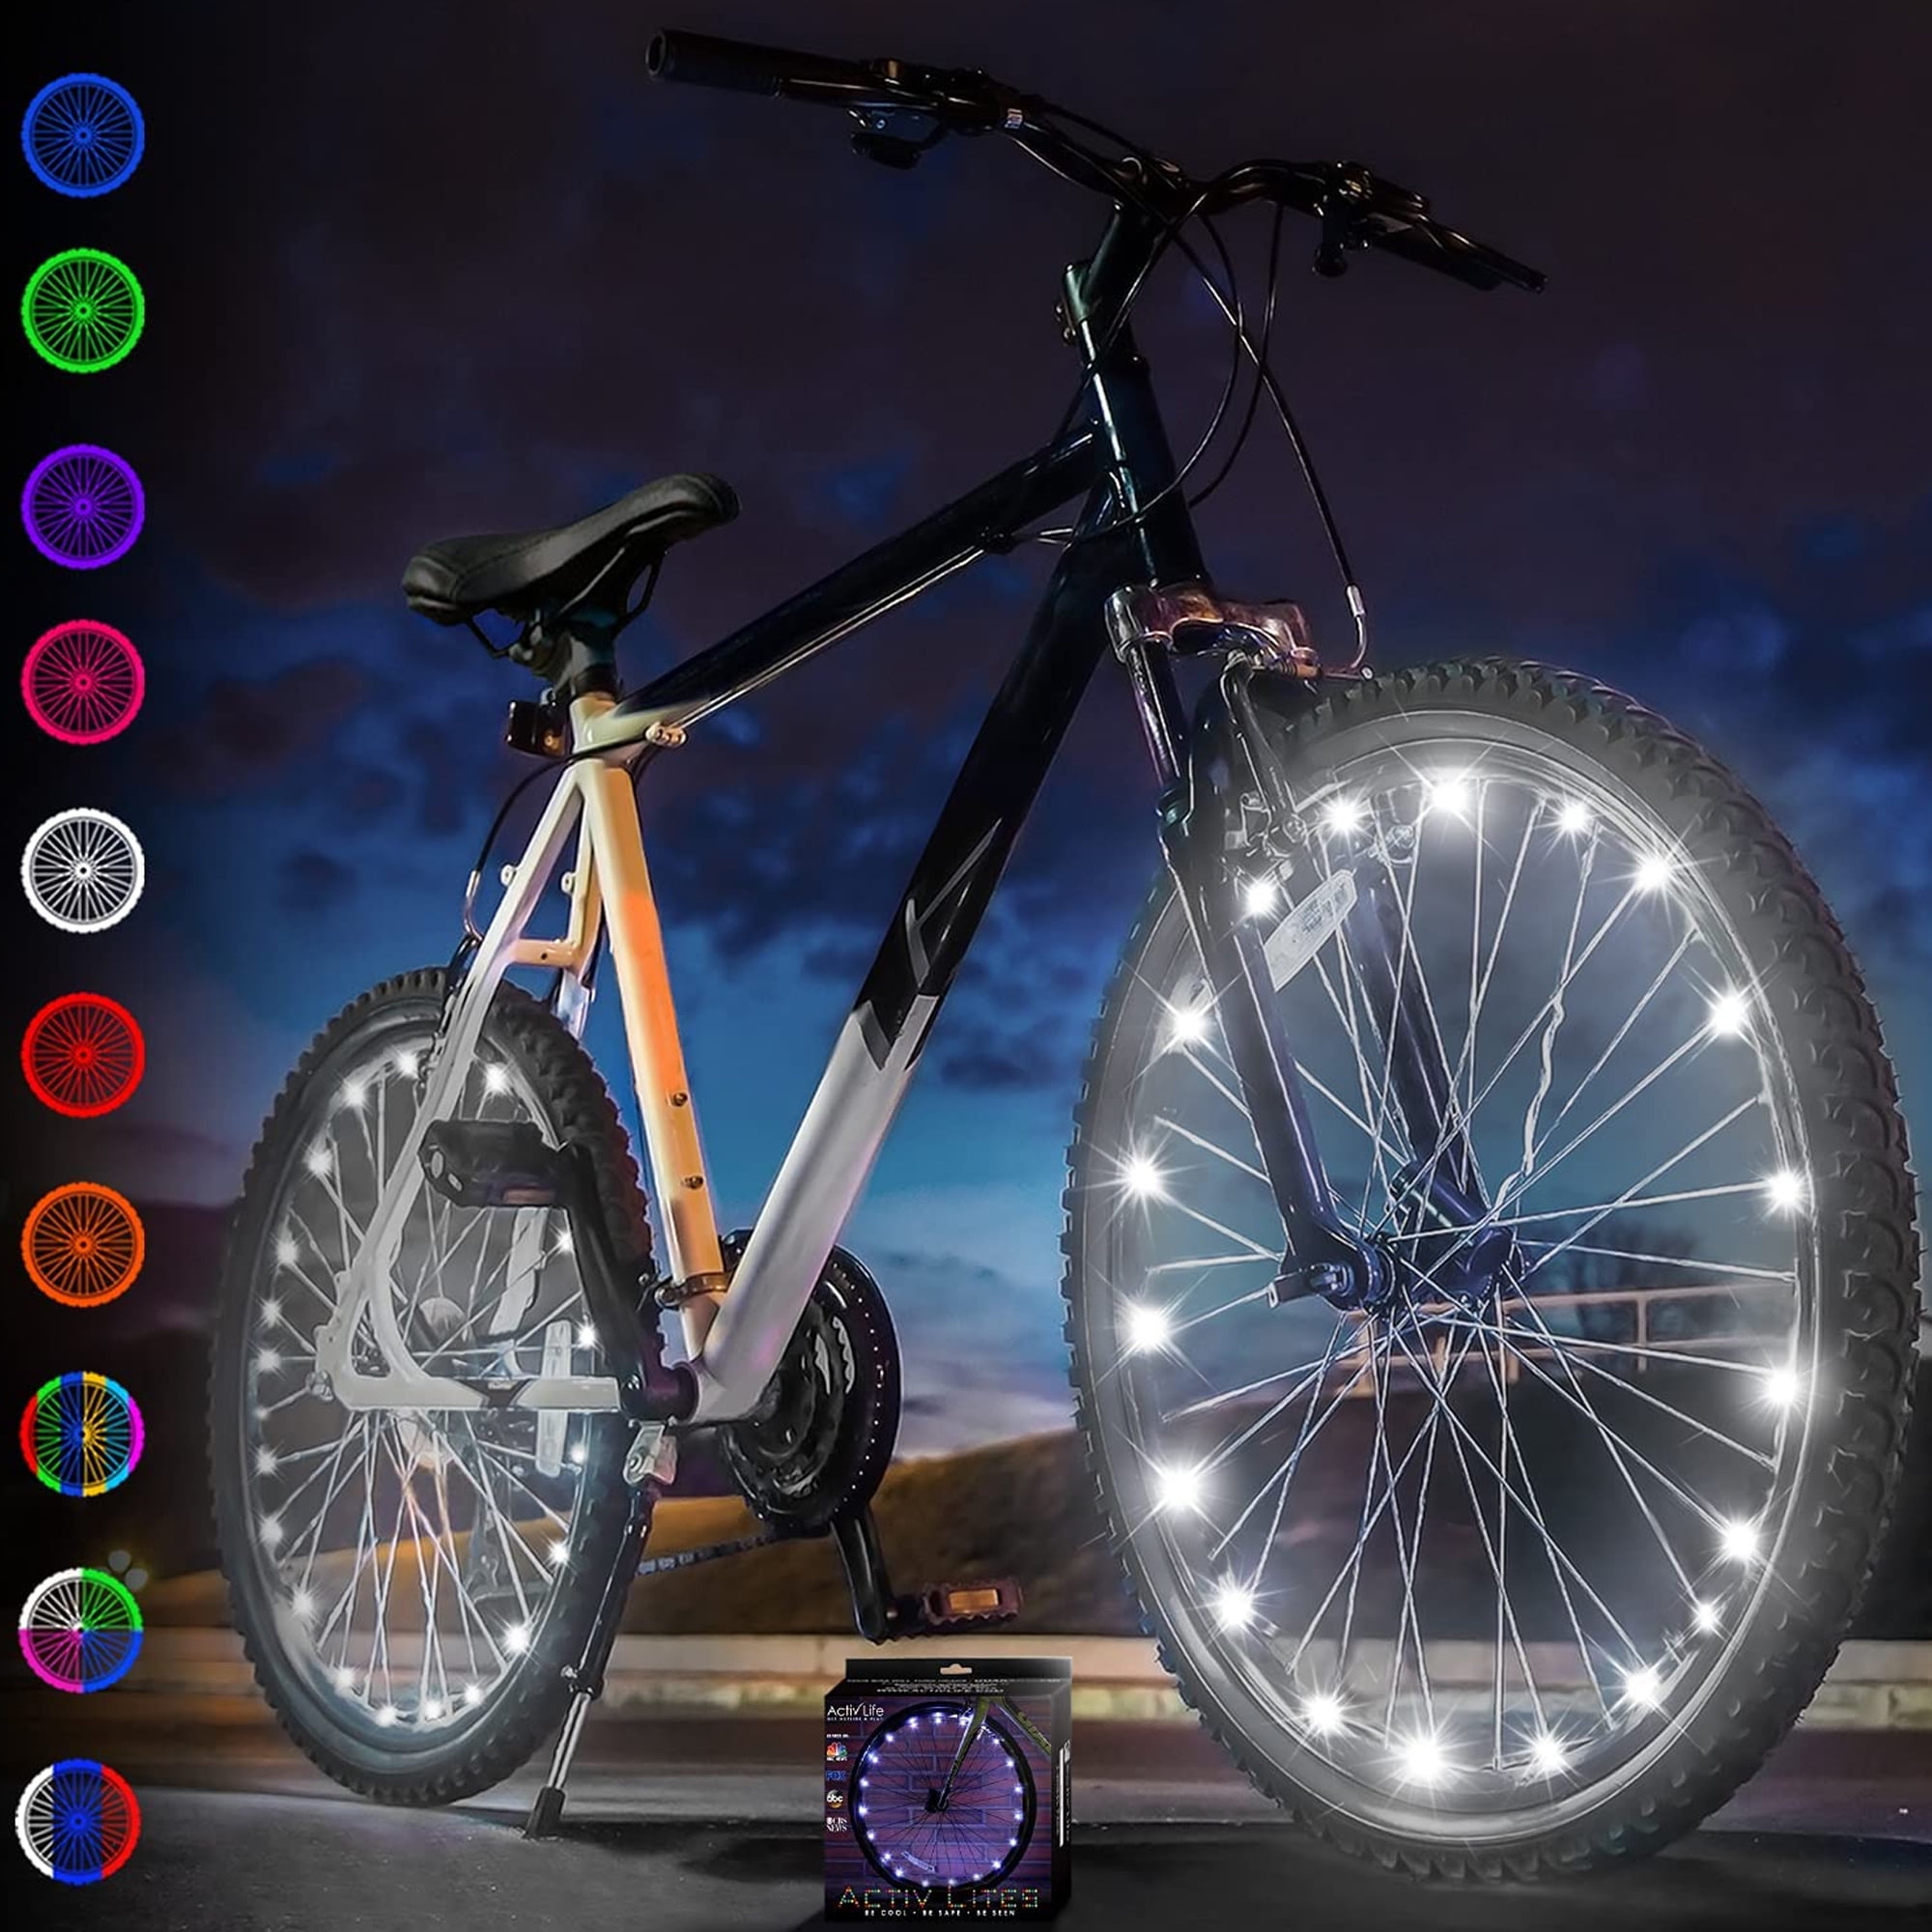 Waterproof USB-Recharge LED Bicycle Bike Front Light Headlight & Tail Light US 